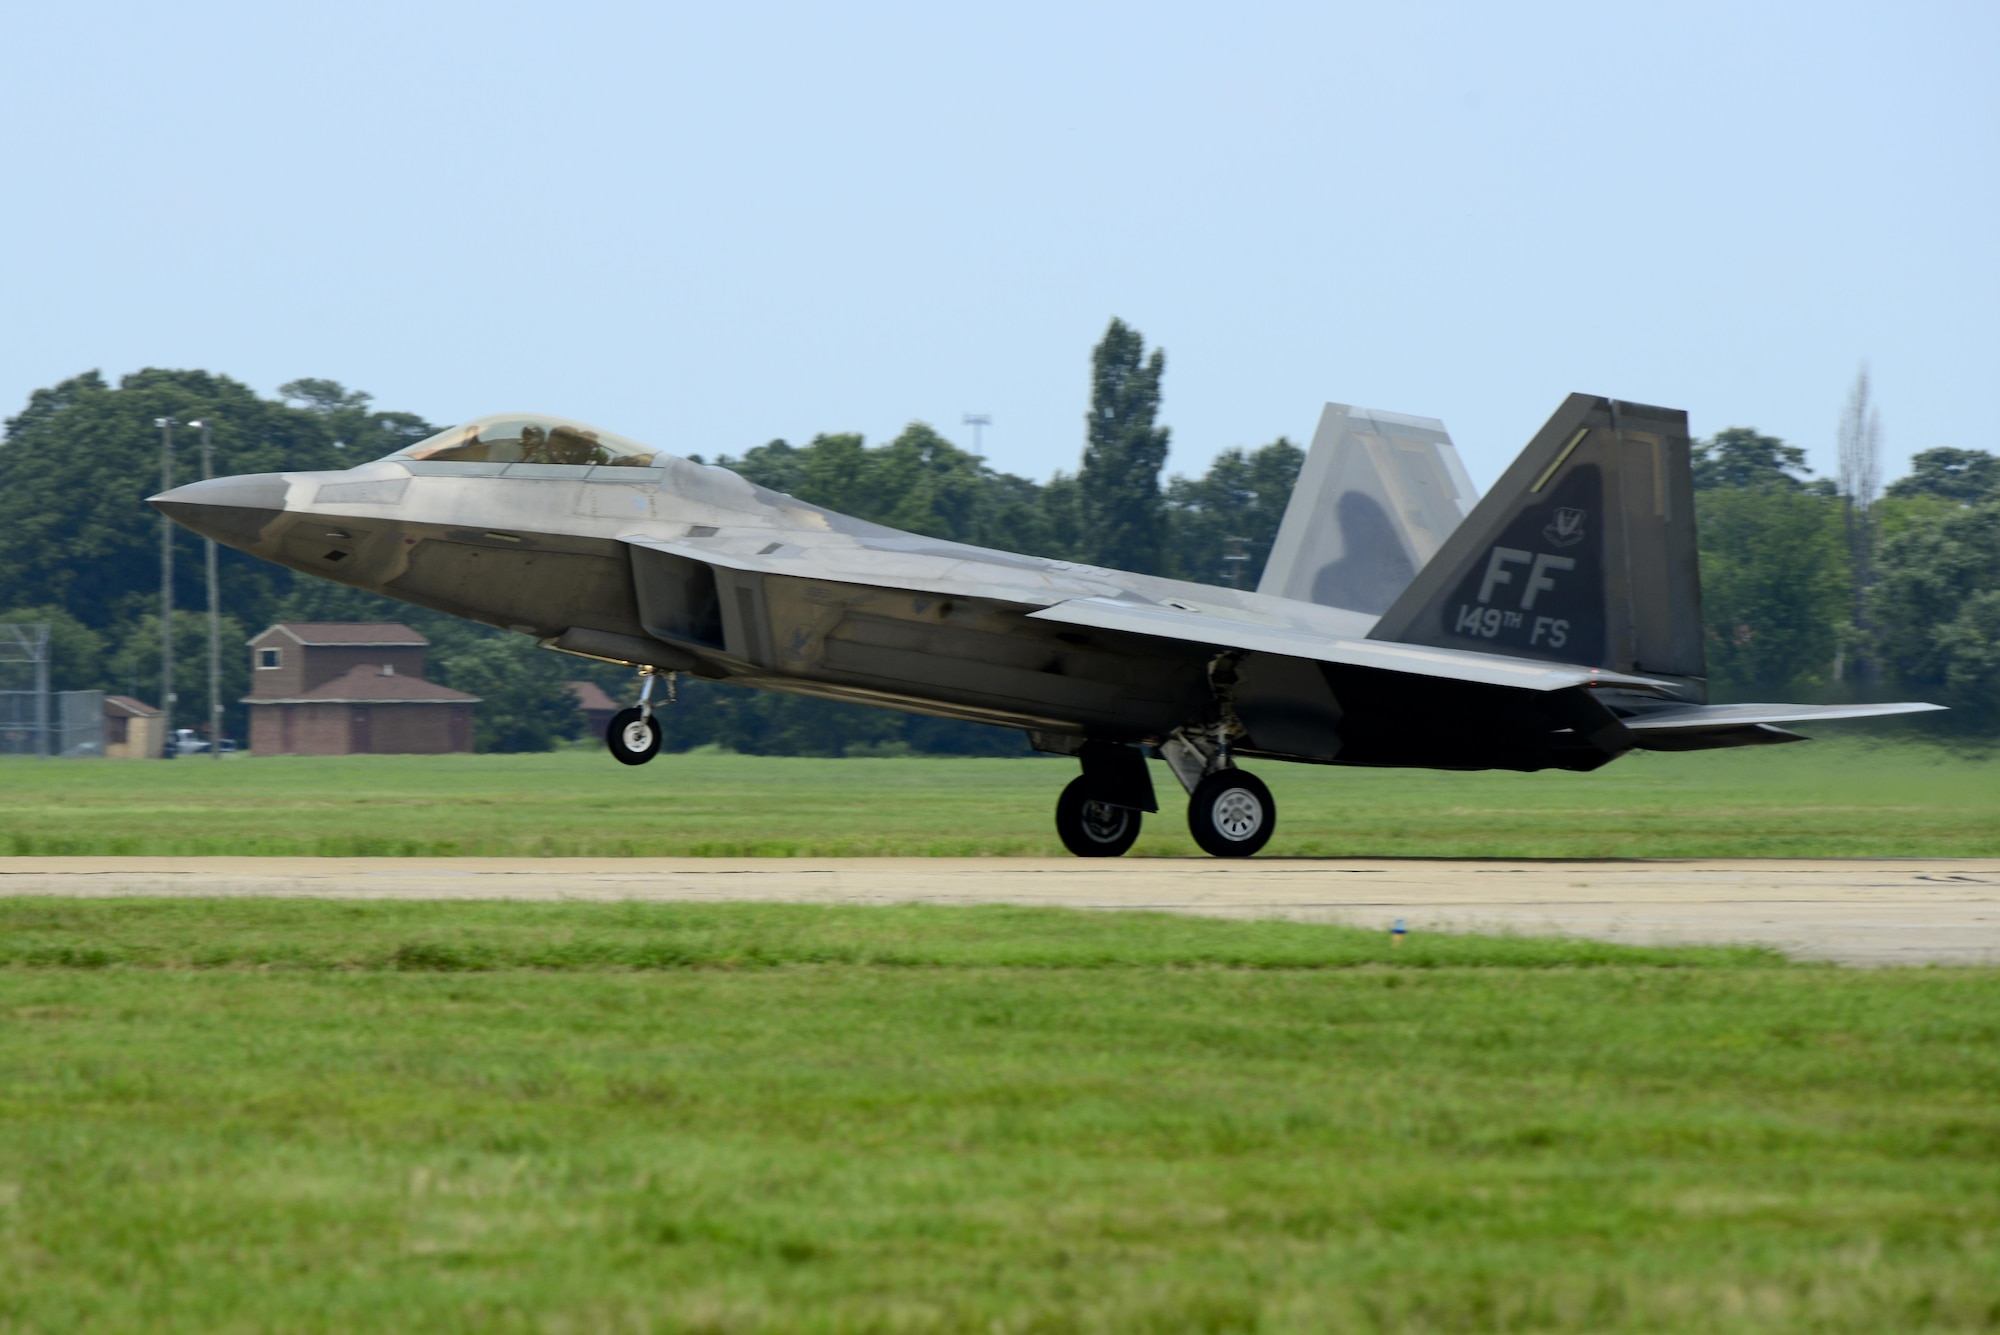 A U.S. Air Force F-22 Raptor lands at Langley Air Force Base, Va., following a 95th Anniversary Maj. Gen. William “Billy” Mitchell memorial reenactment, July 22, 2016. Each year, Air Force Airmen honor Mitchell, a U.S. Army general regarded as the father of the Air Force. (U.S. Air Force photo by Staff Sgt. R. Alex Durbin)